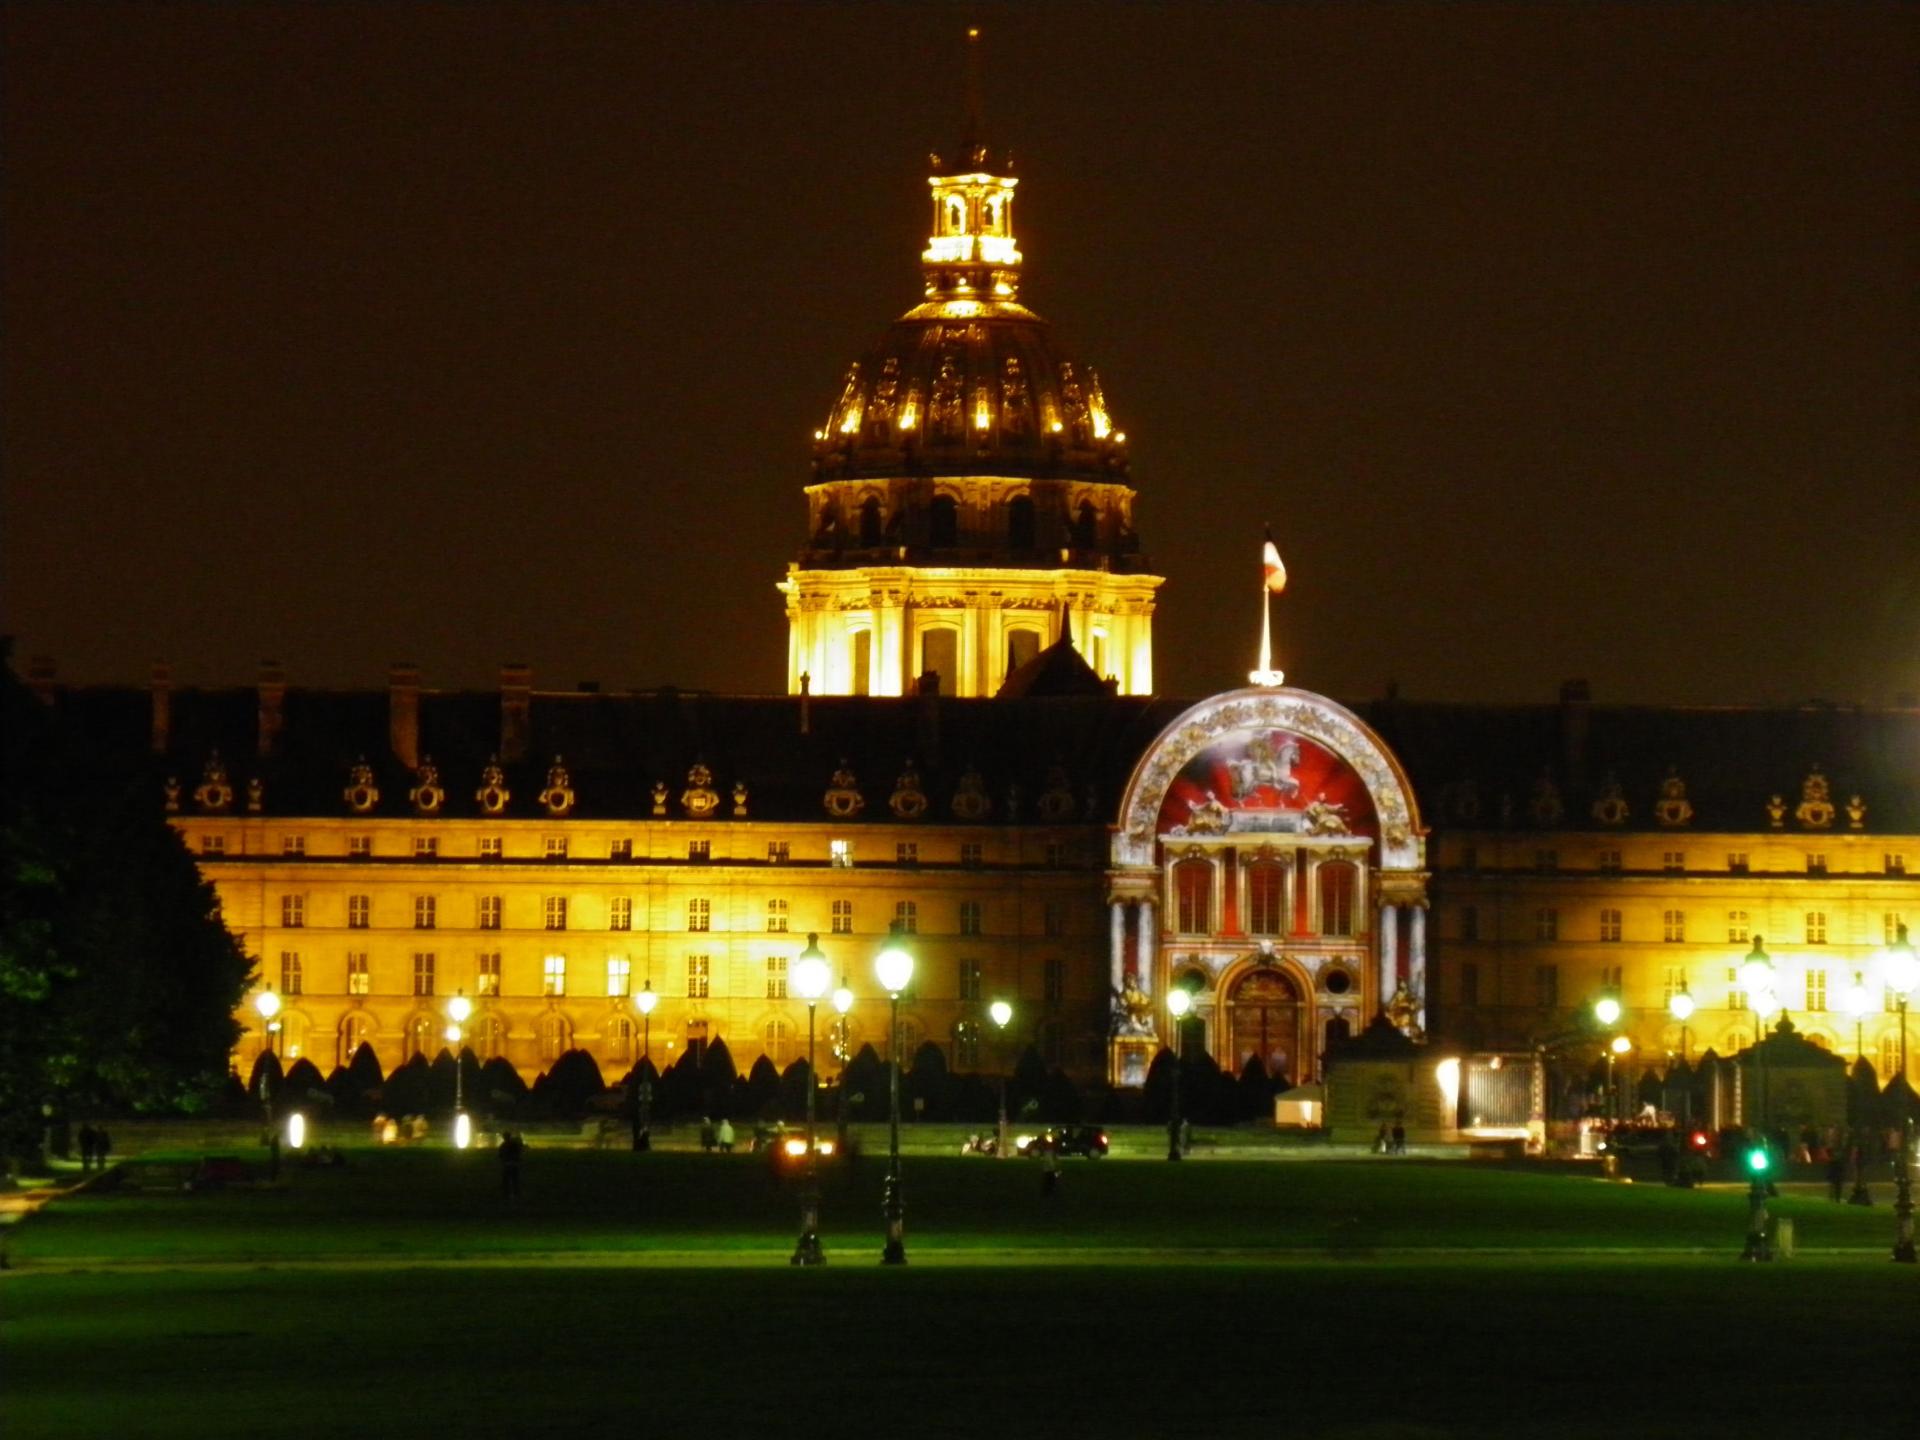 Come spend a Night at the Invalides!